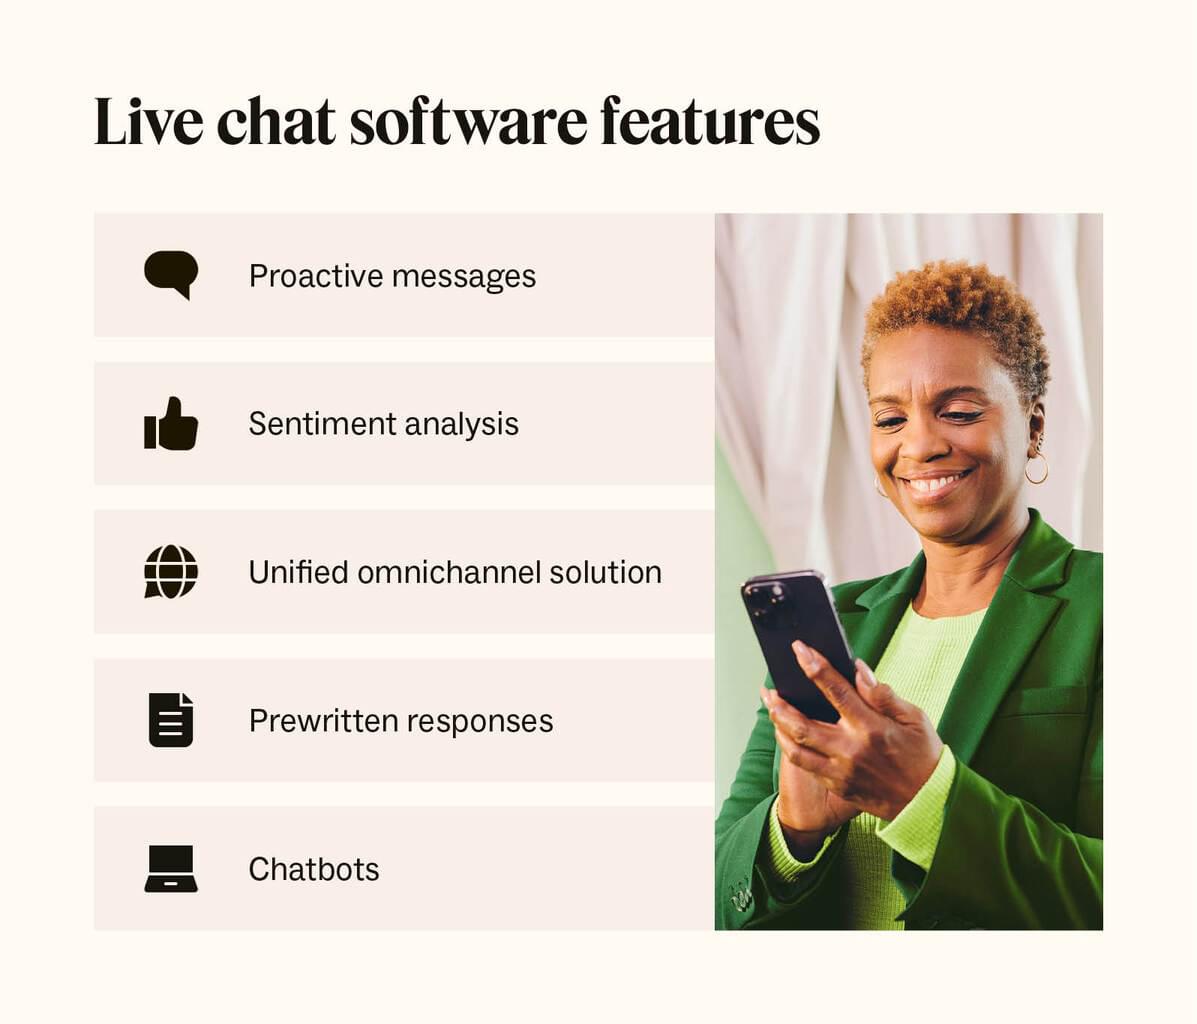 Live chat software features